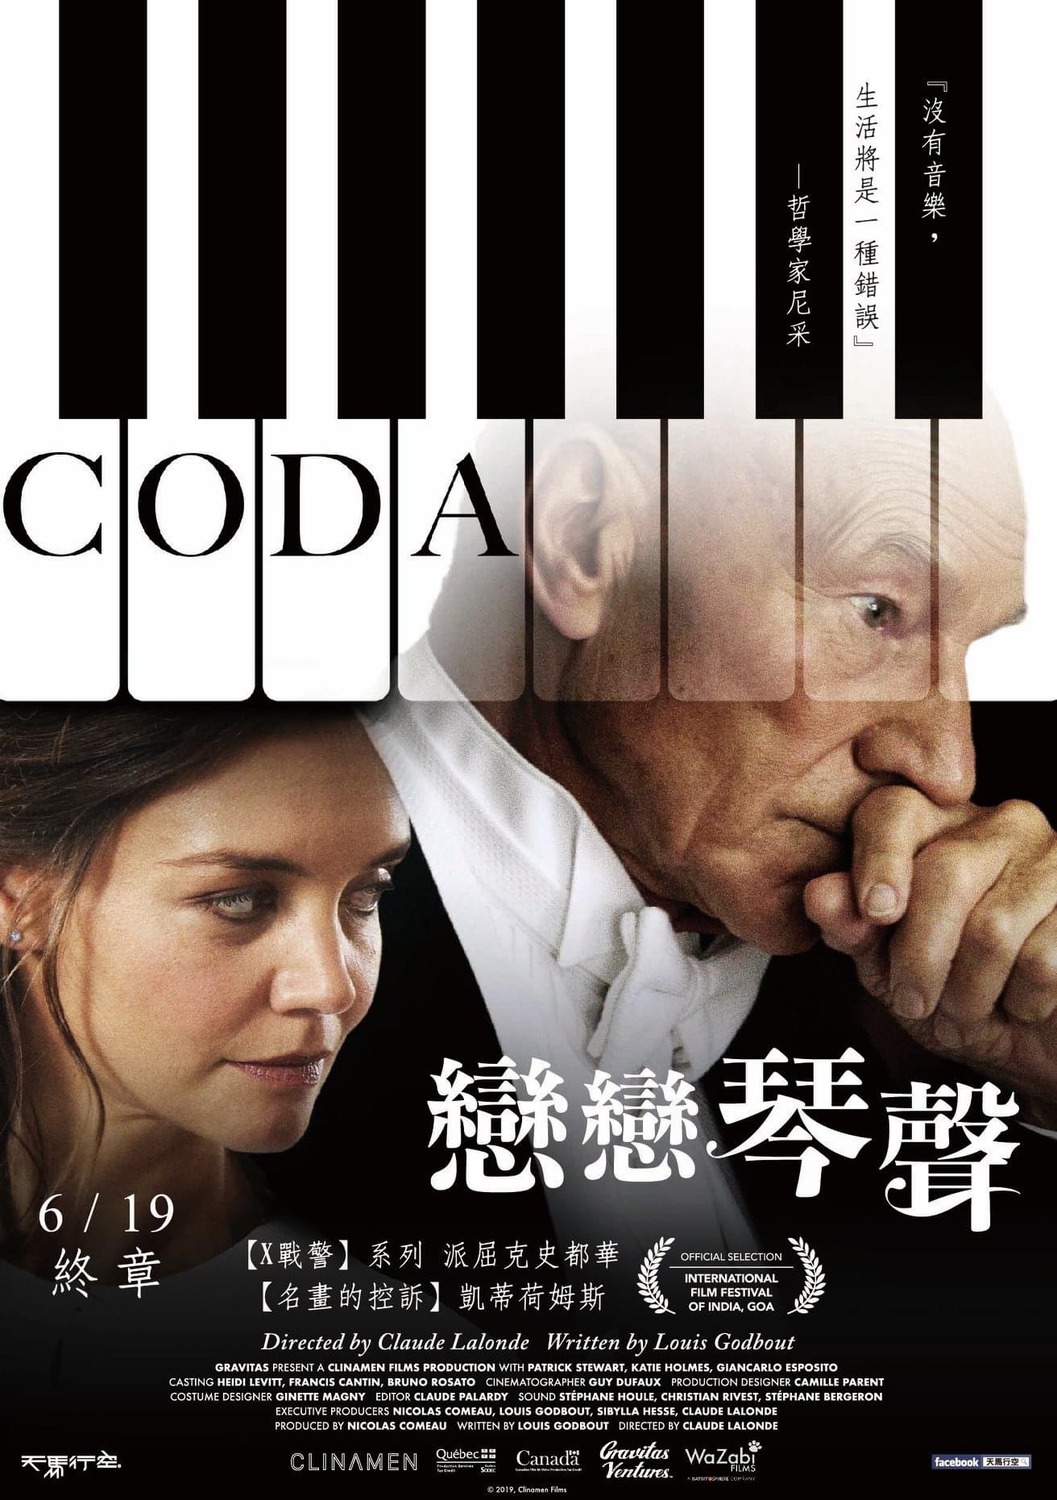 Extra Large Movie Poster Image for Coda (#6 of 8)